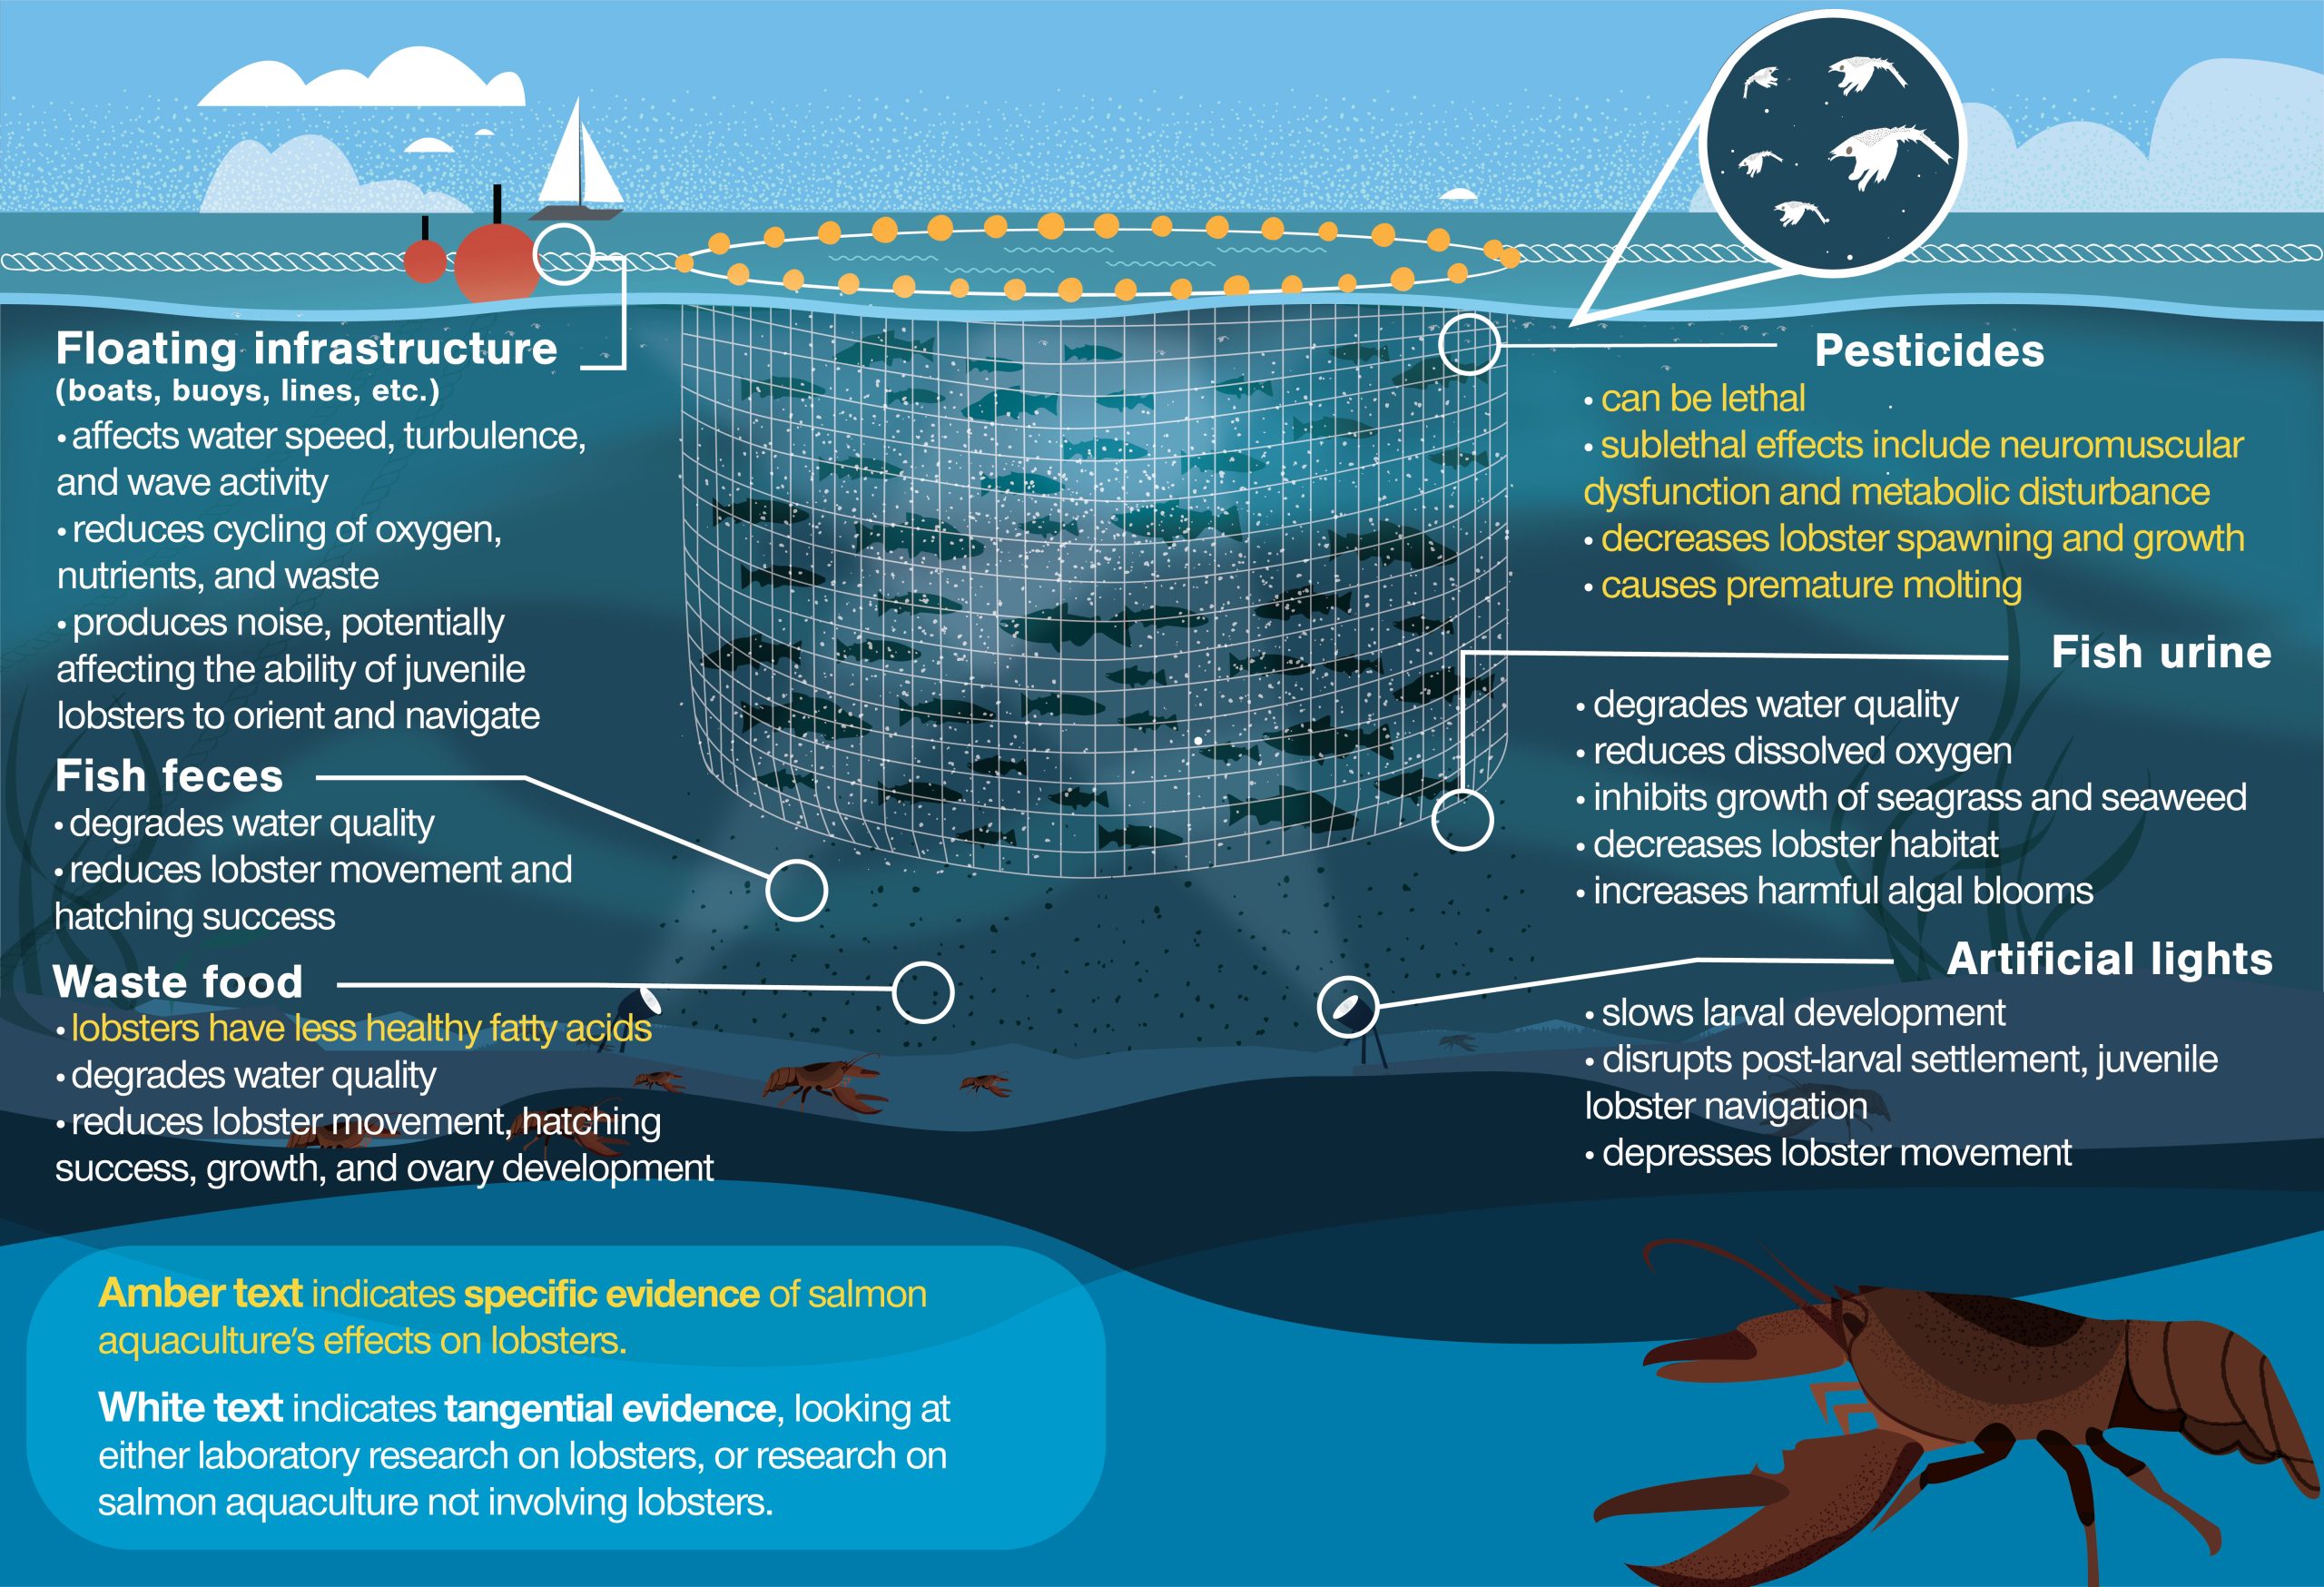 infographic about the ways fish farms affect lobster